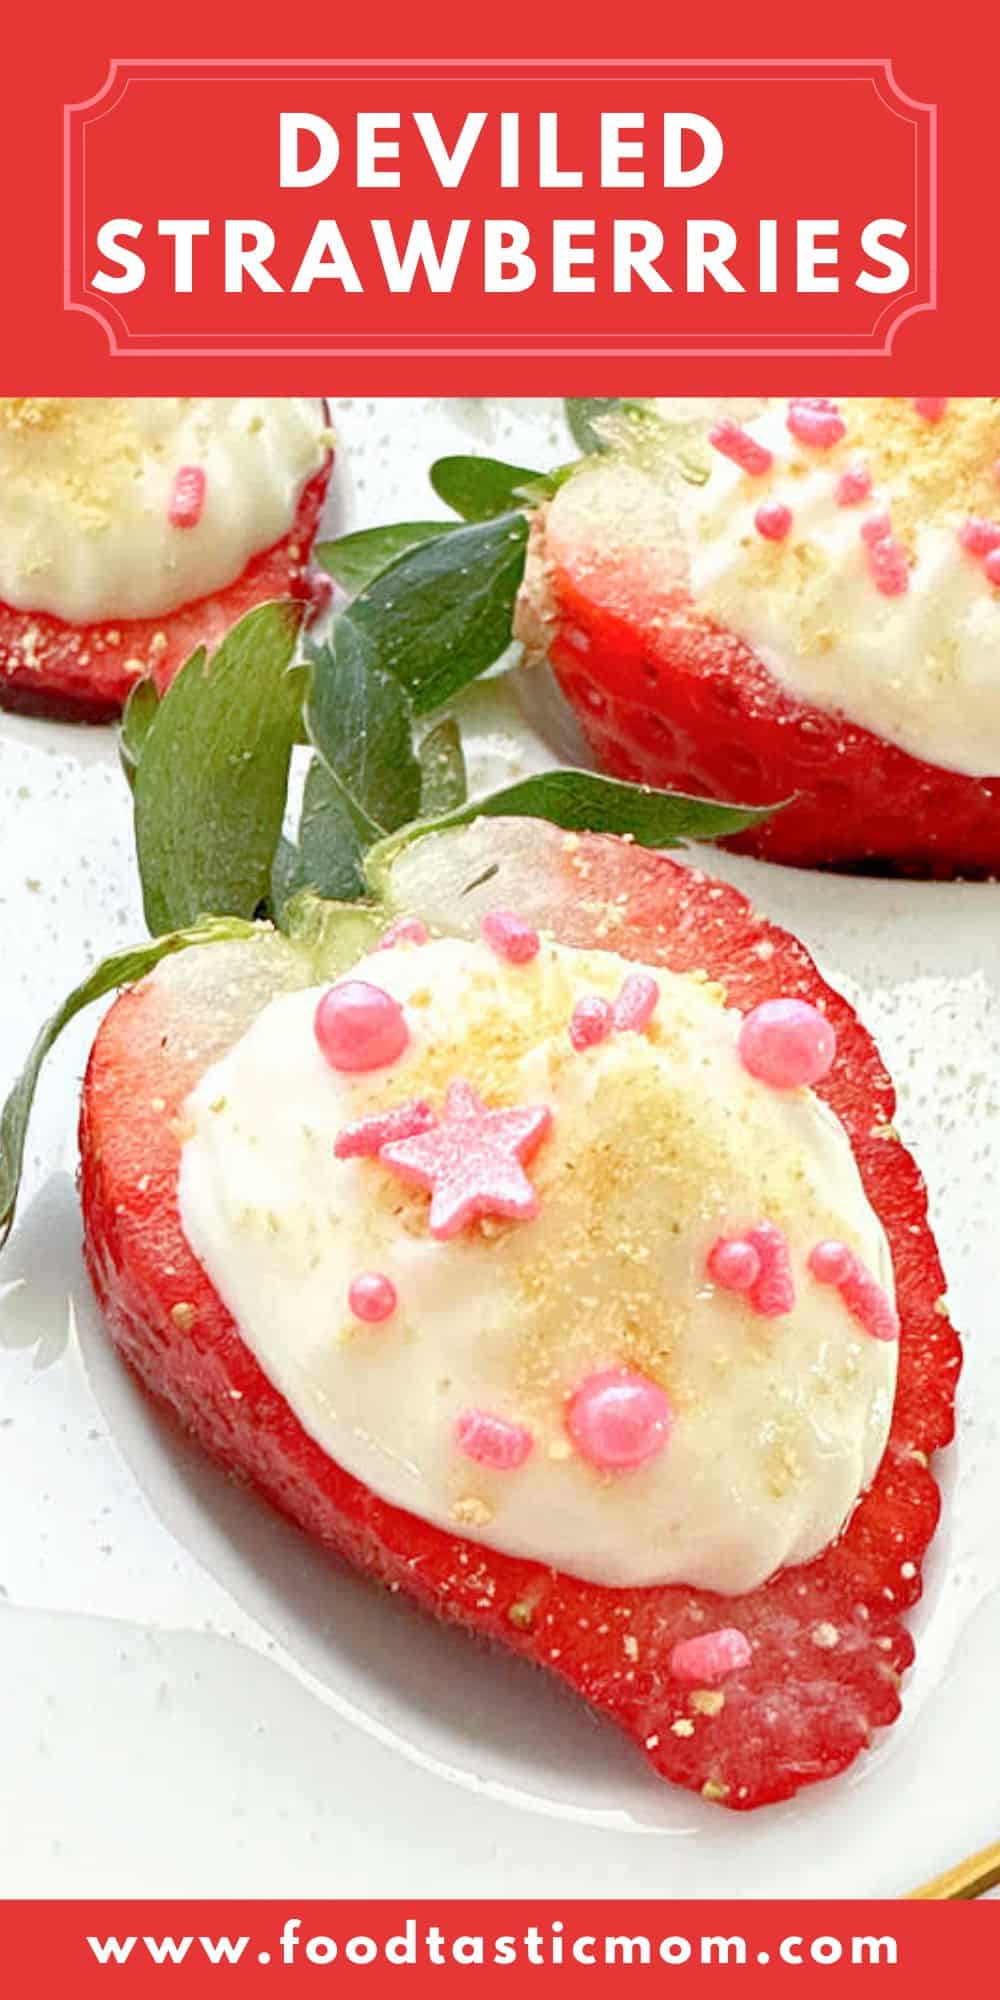 Try filling your deviled egg platter with juicy strawberries! This yummy dessert combines fresh berries with a creamy cheesecake filling. via @foodtasticmom